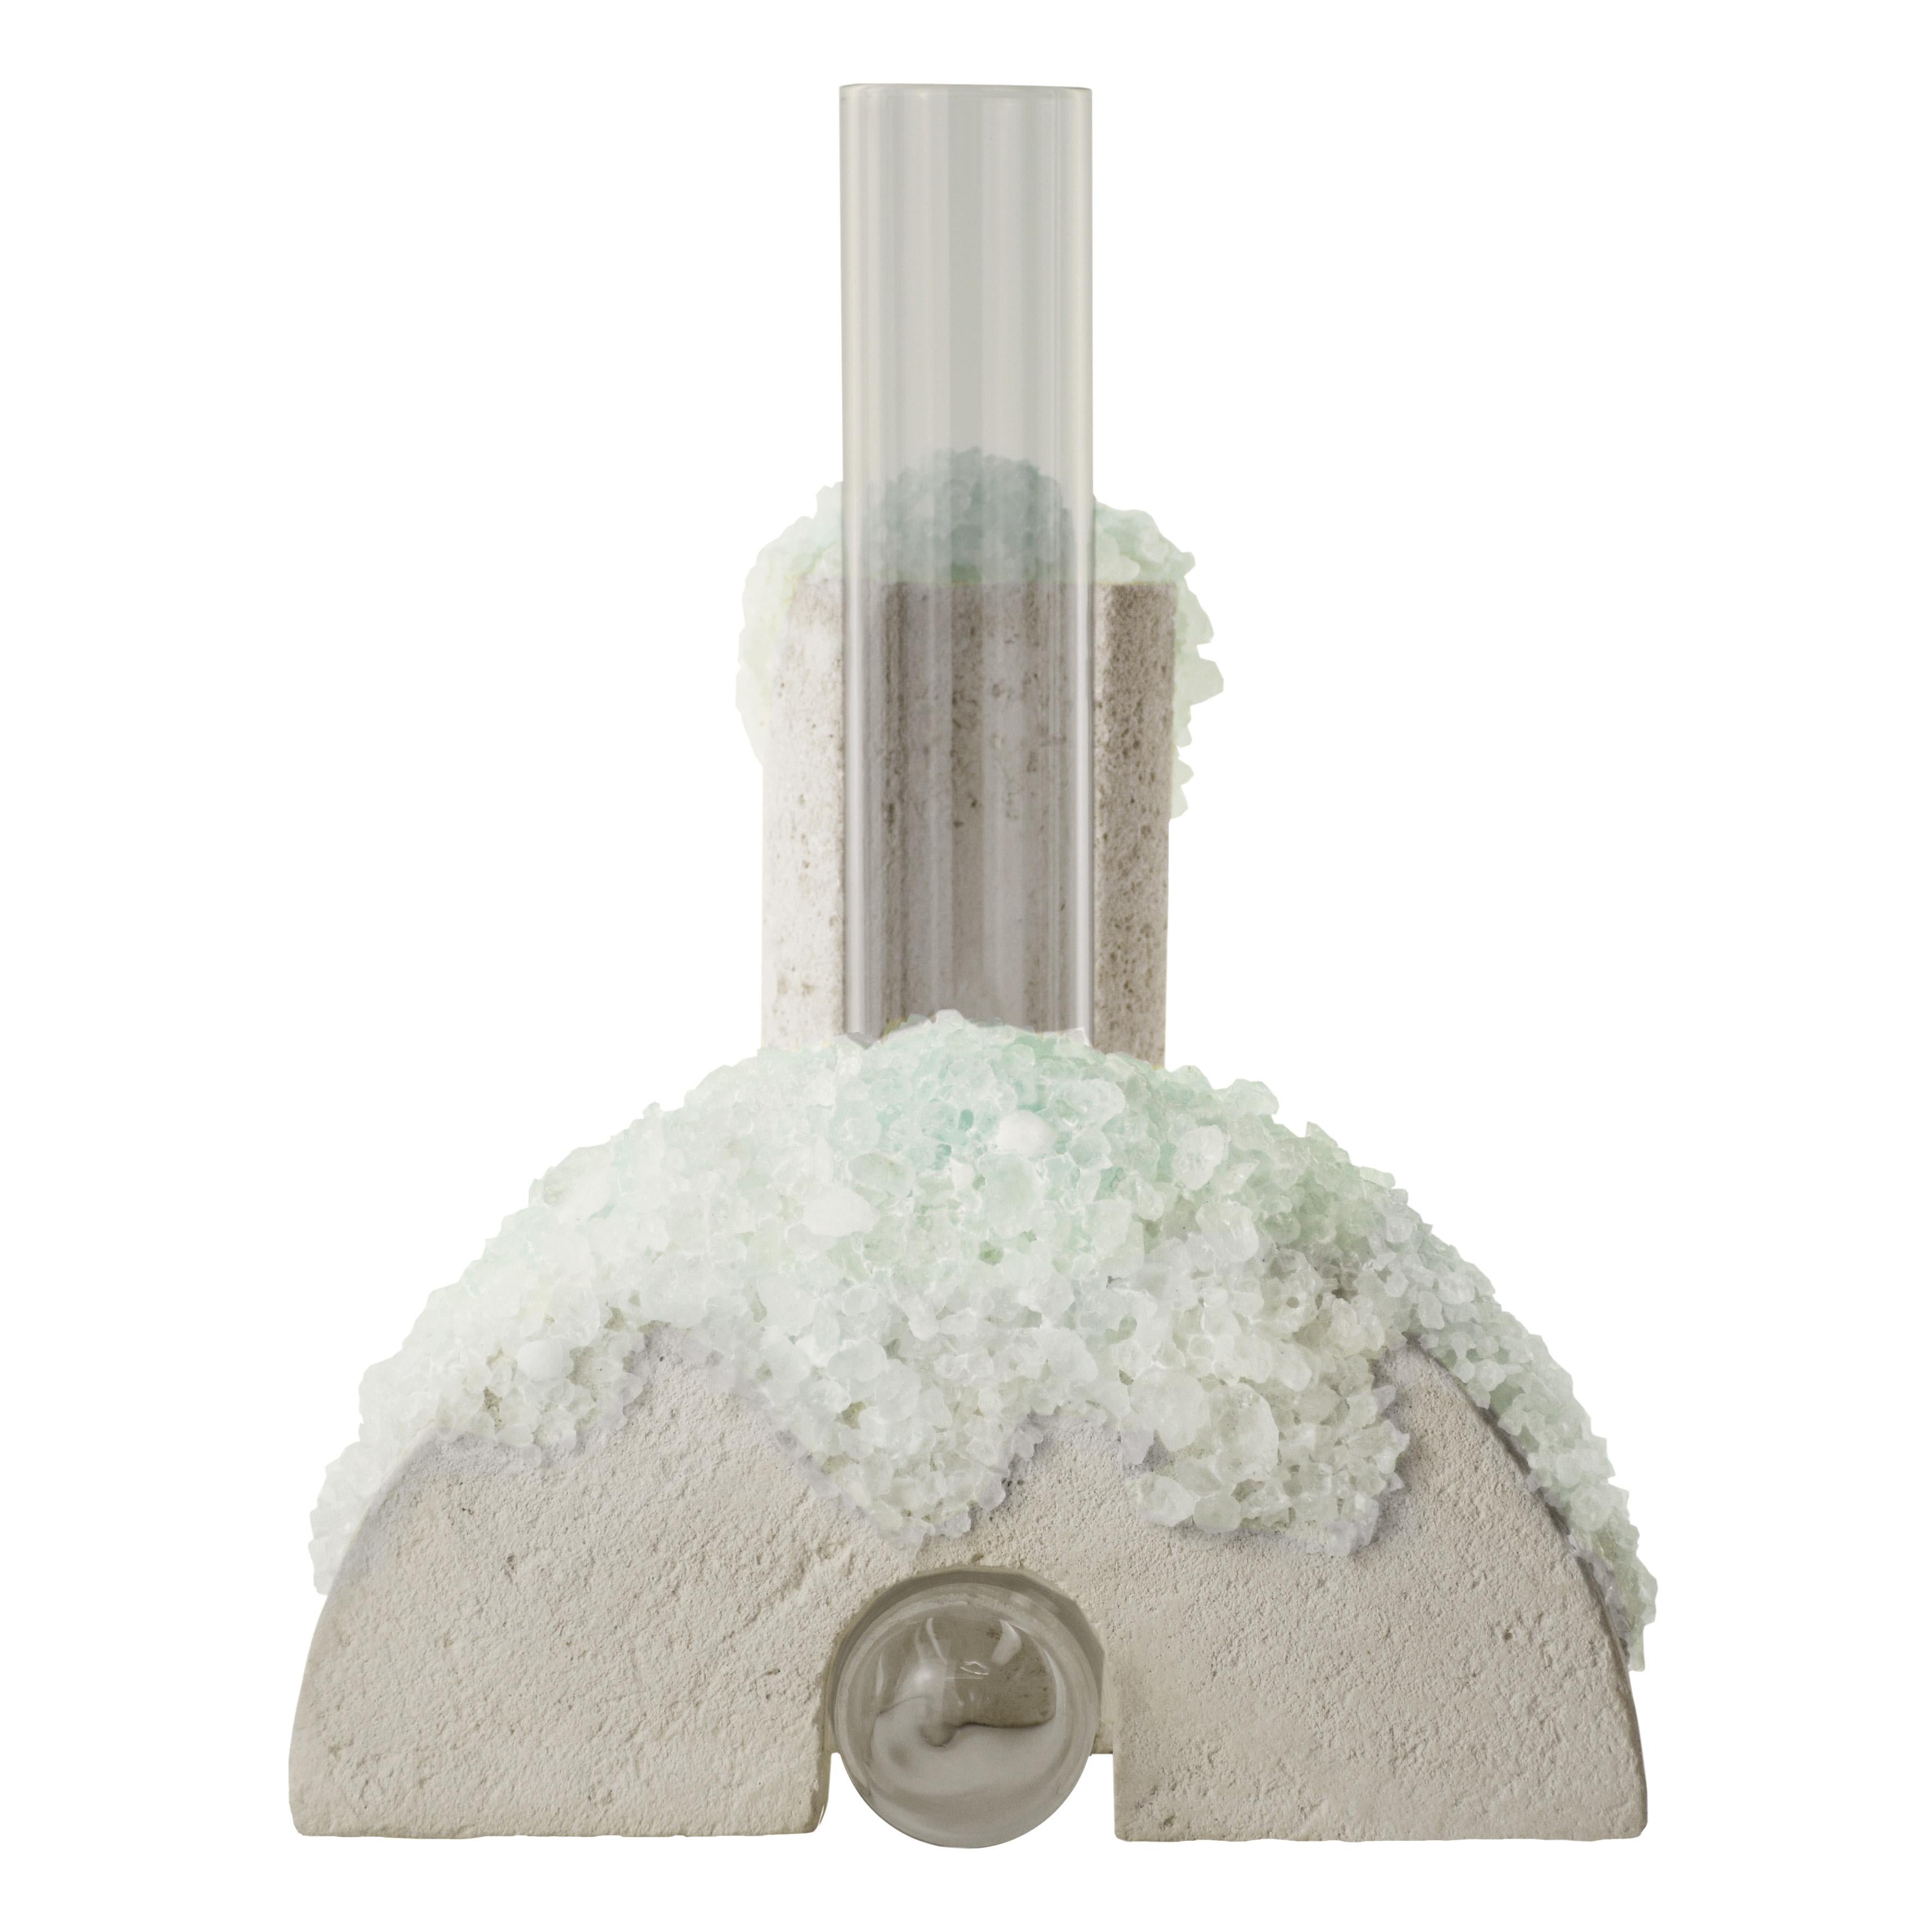 Winter 1 Cochlea della Metamorfosi 1 Seasons Edition Vase by Coki Barbieri
Dimensions: W 18,5 x D 15 x H 24 cm.
Materials: Handcrafted stone made with Matera stone fragments, sedimentary rocks of the Italian Apennines and pure water, Italian rock